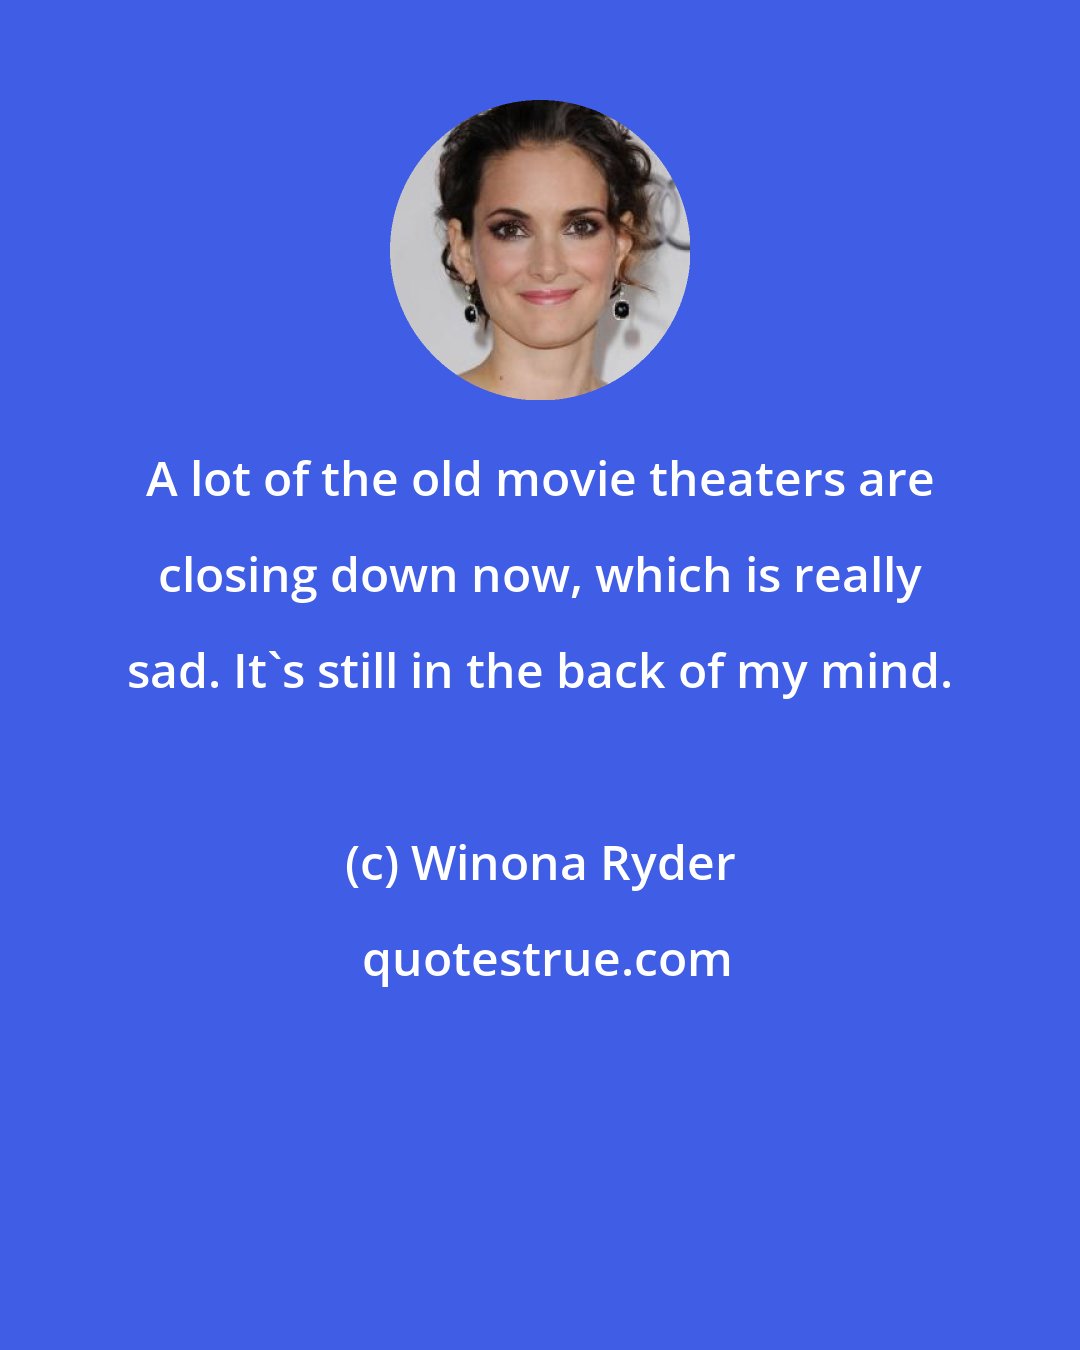 Winona Ryder: A lot of the old movie theaters are closing down now, which is really sad. It's still in the back of my mind.